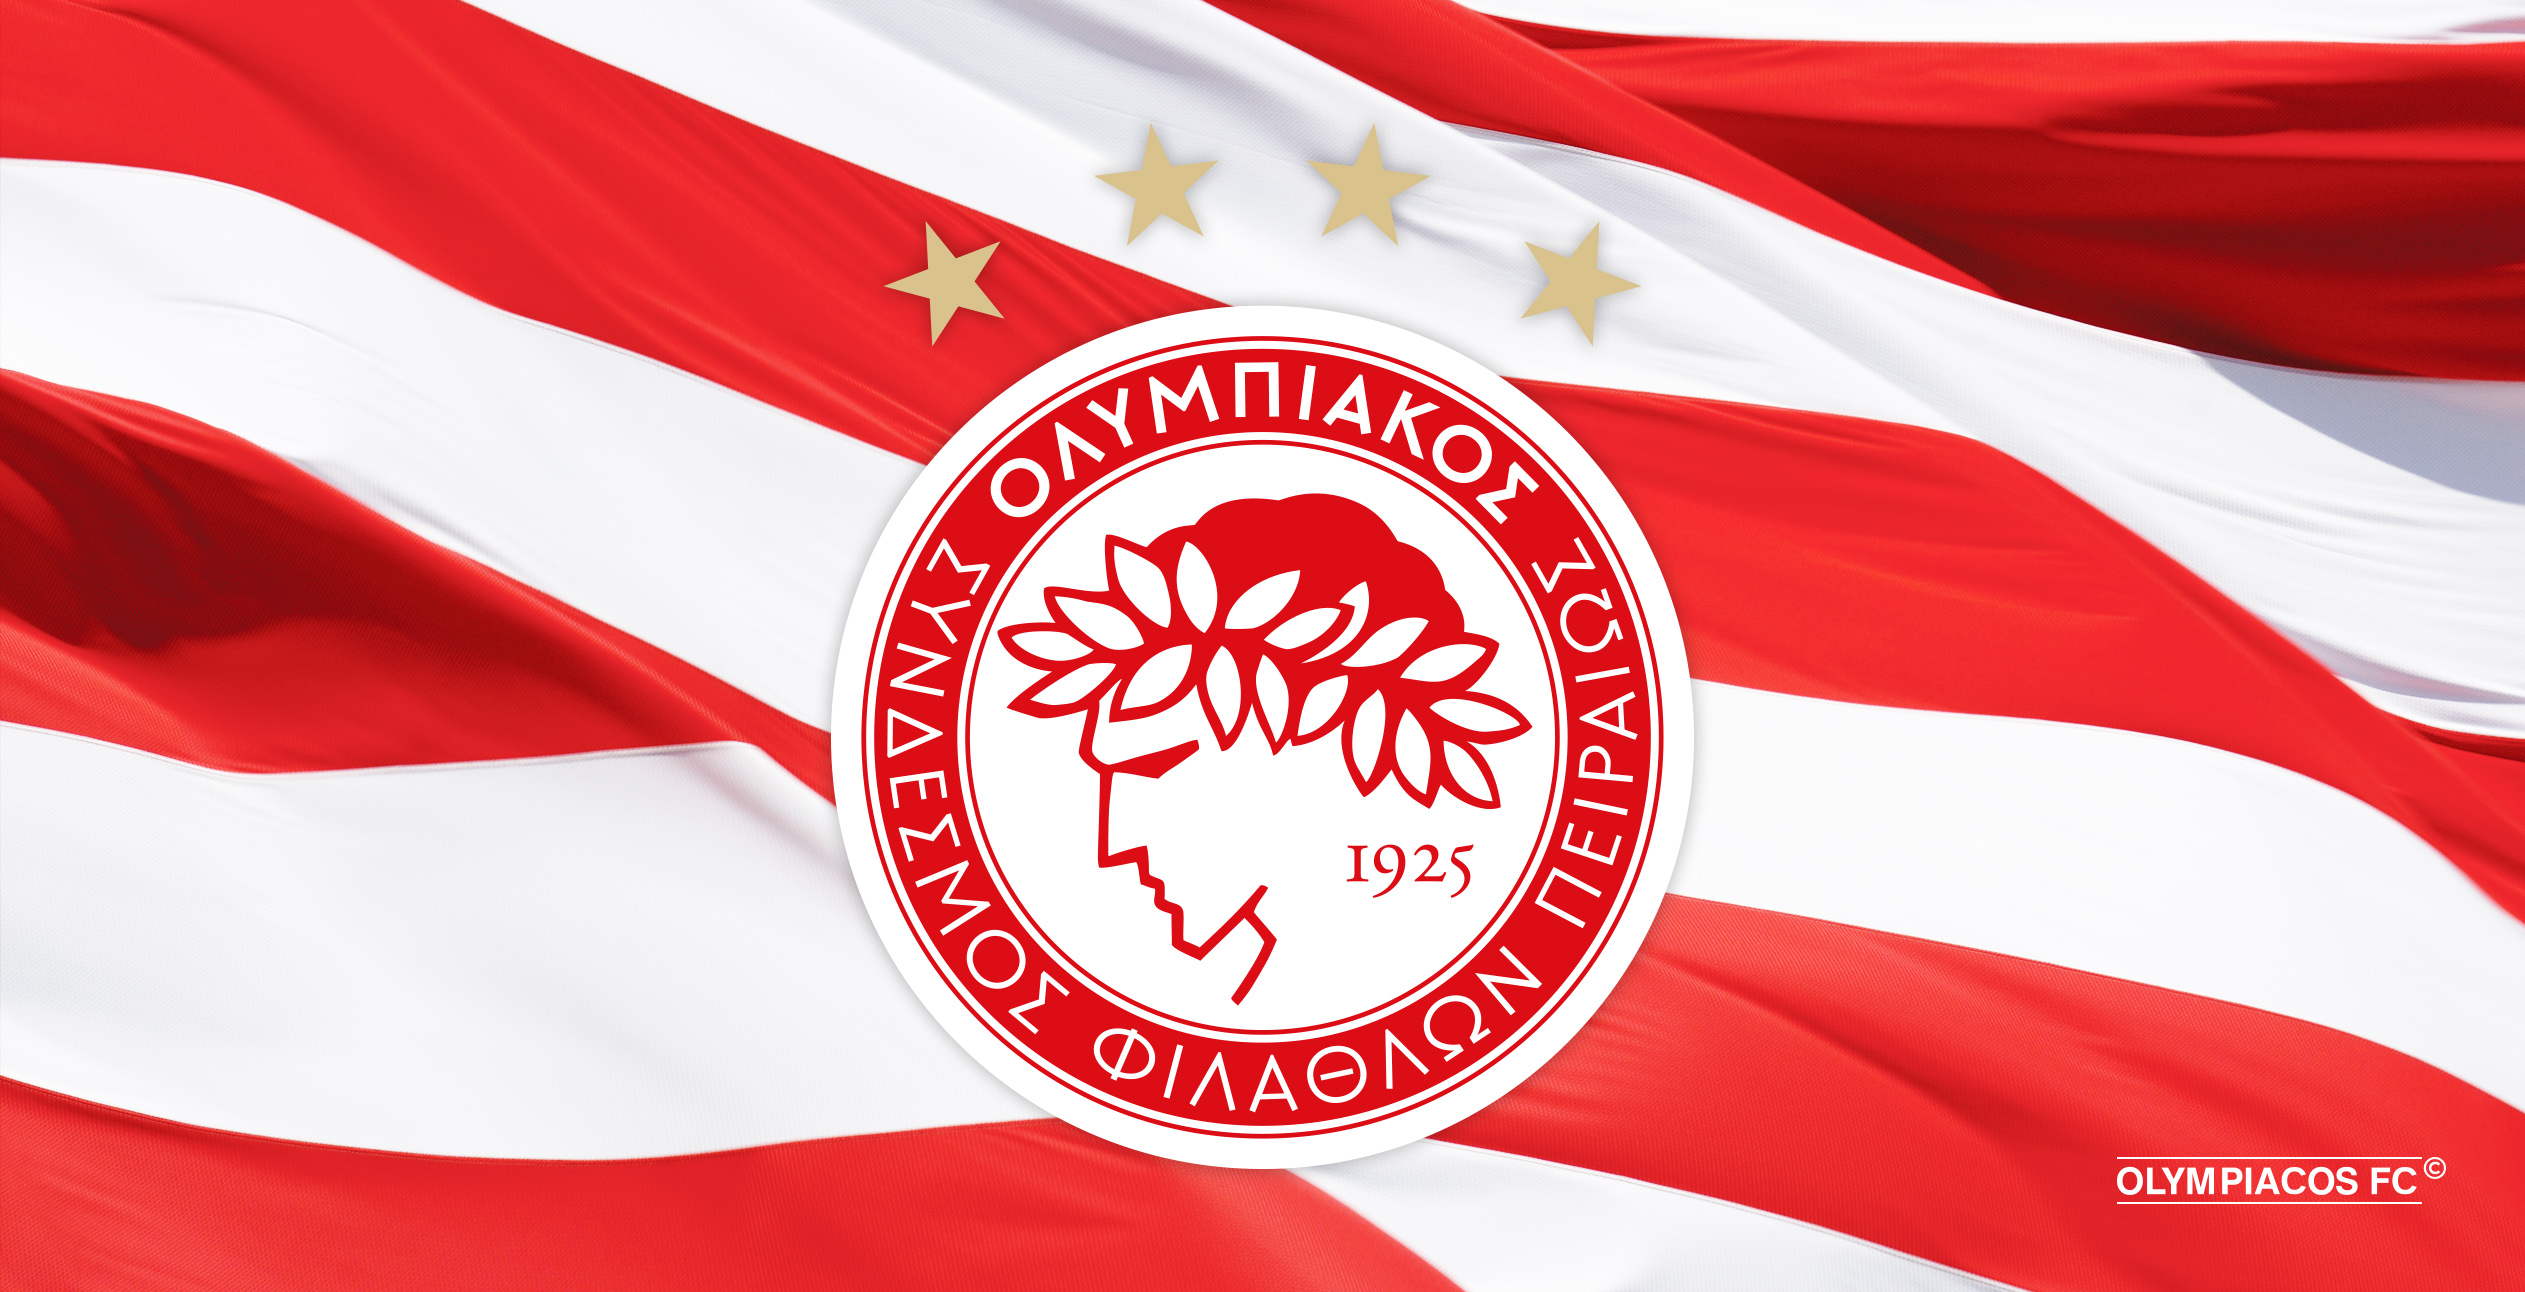 Olympiacos FC – Announcement